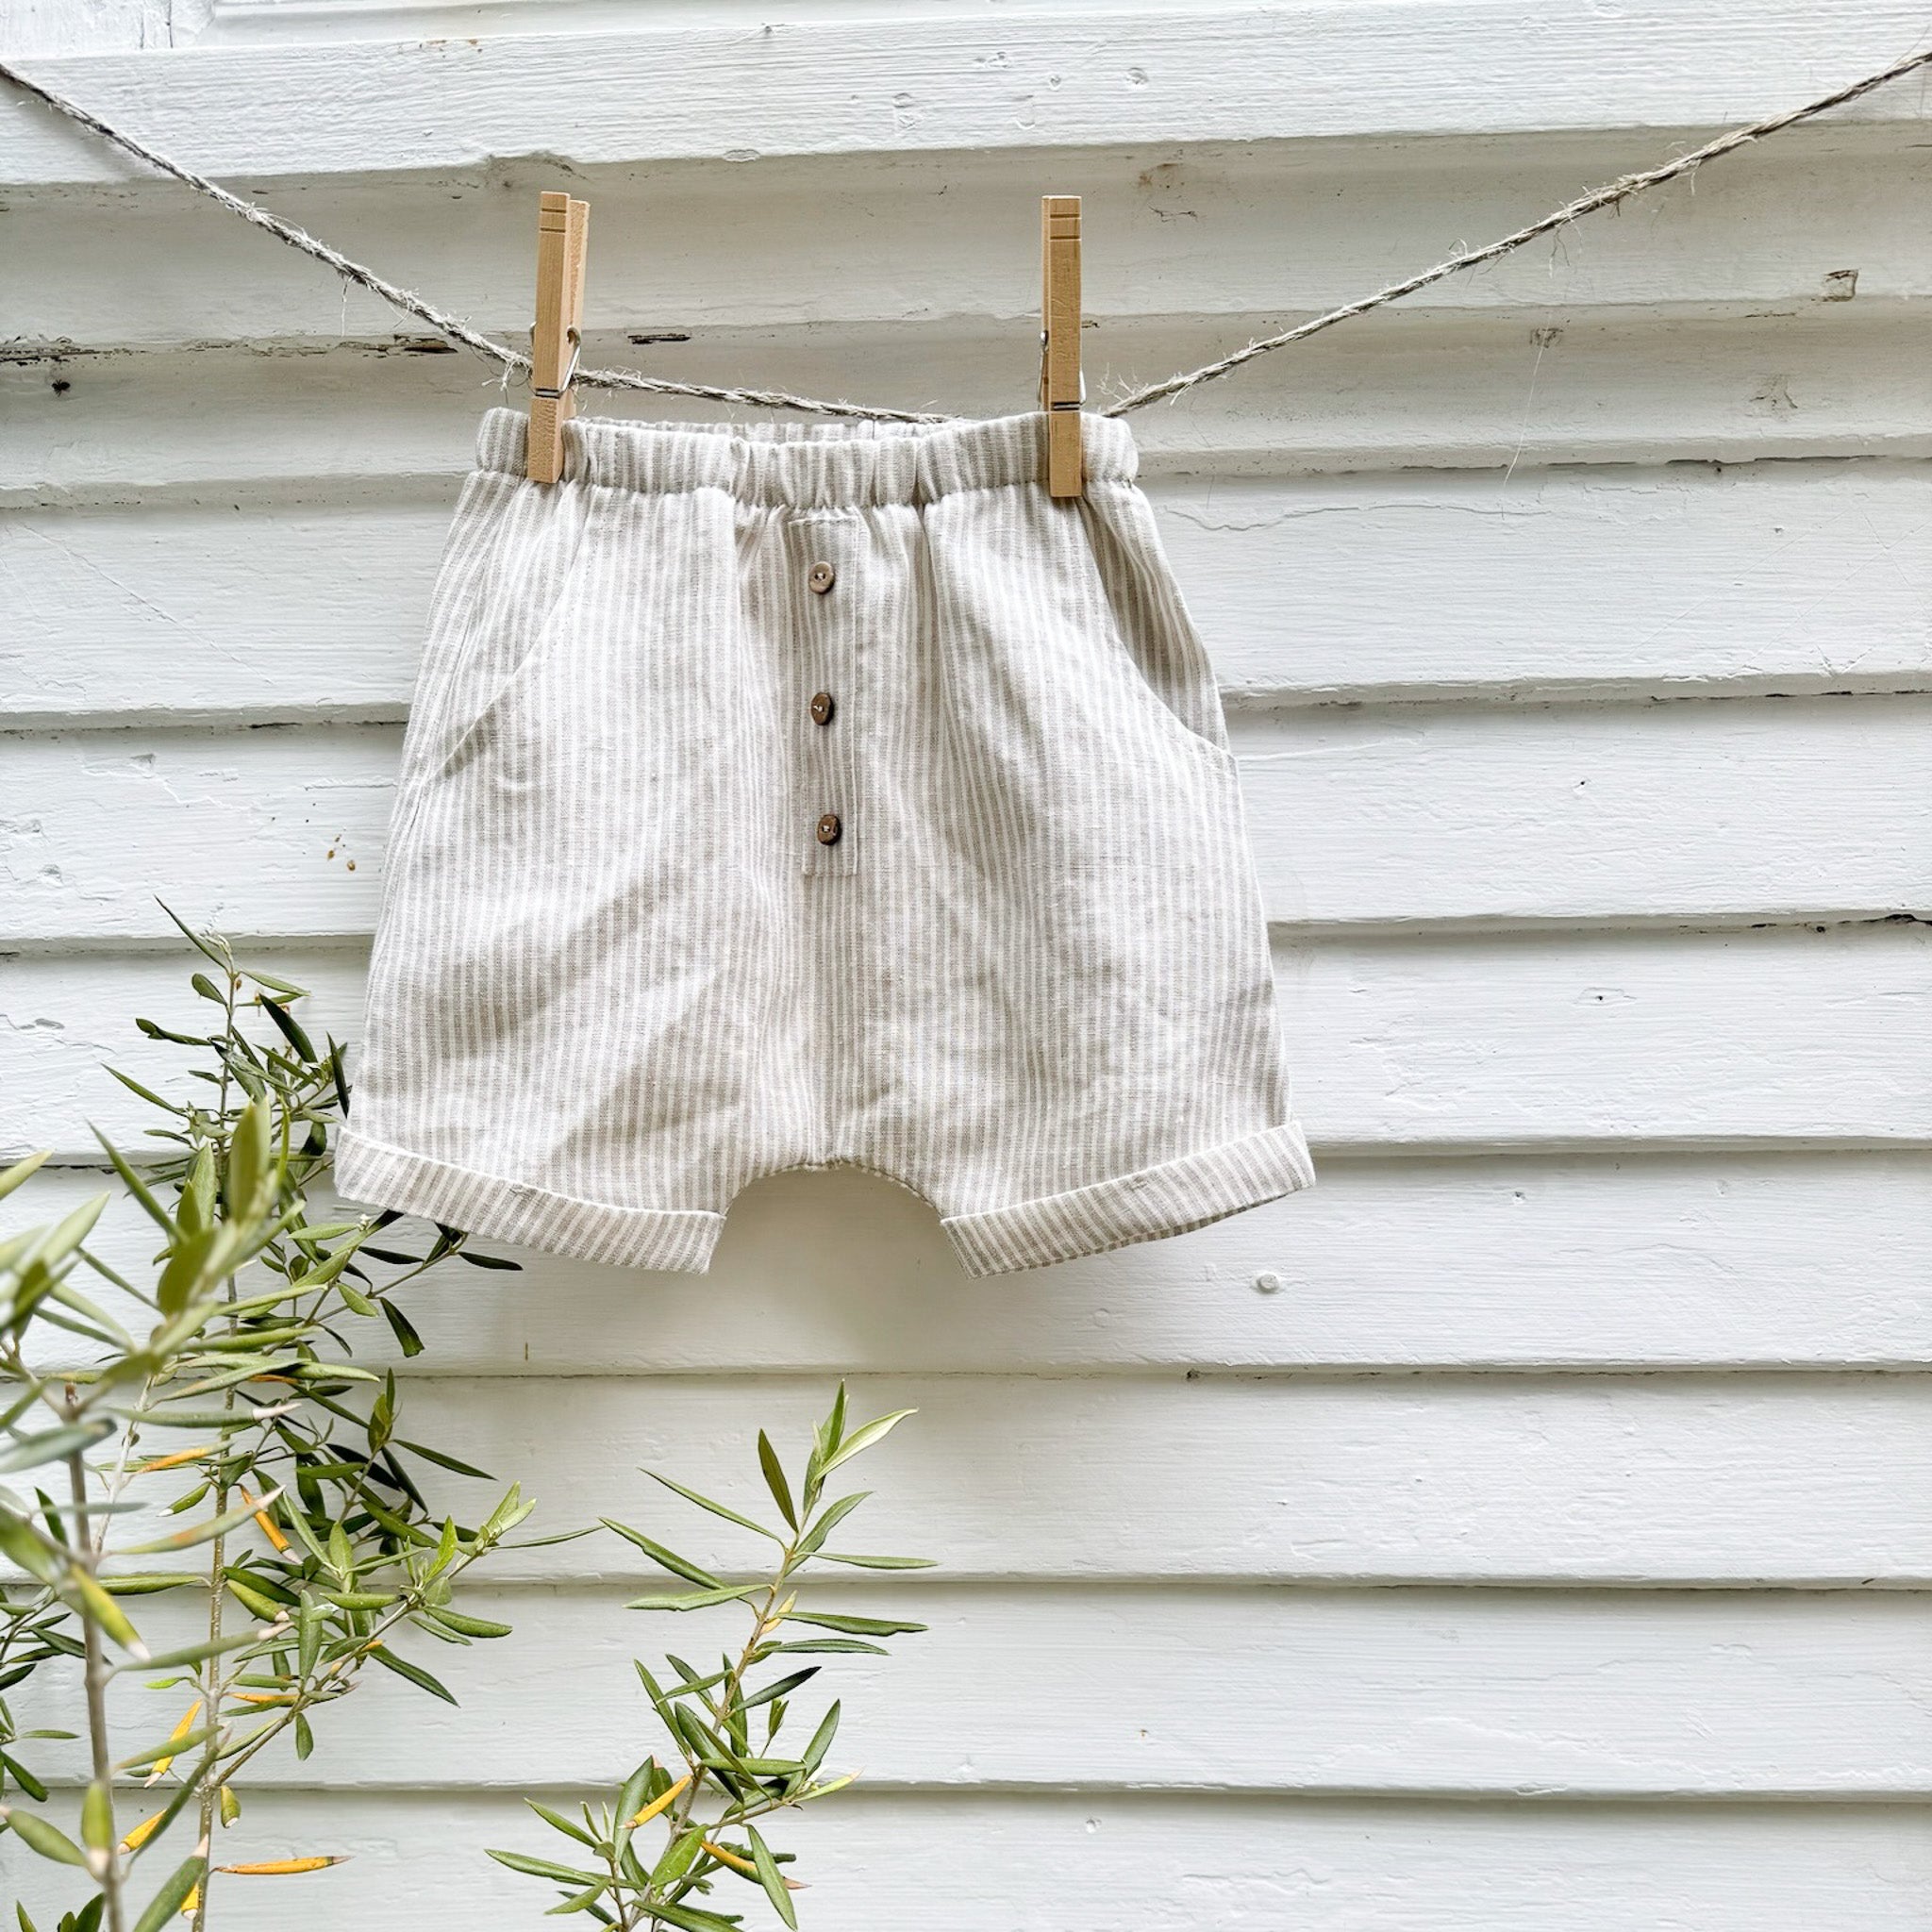 kid's linen shorts with tan and white pin stripes and three decorative  buttons in front